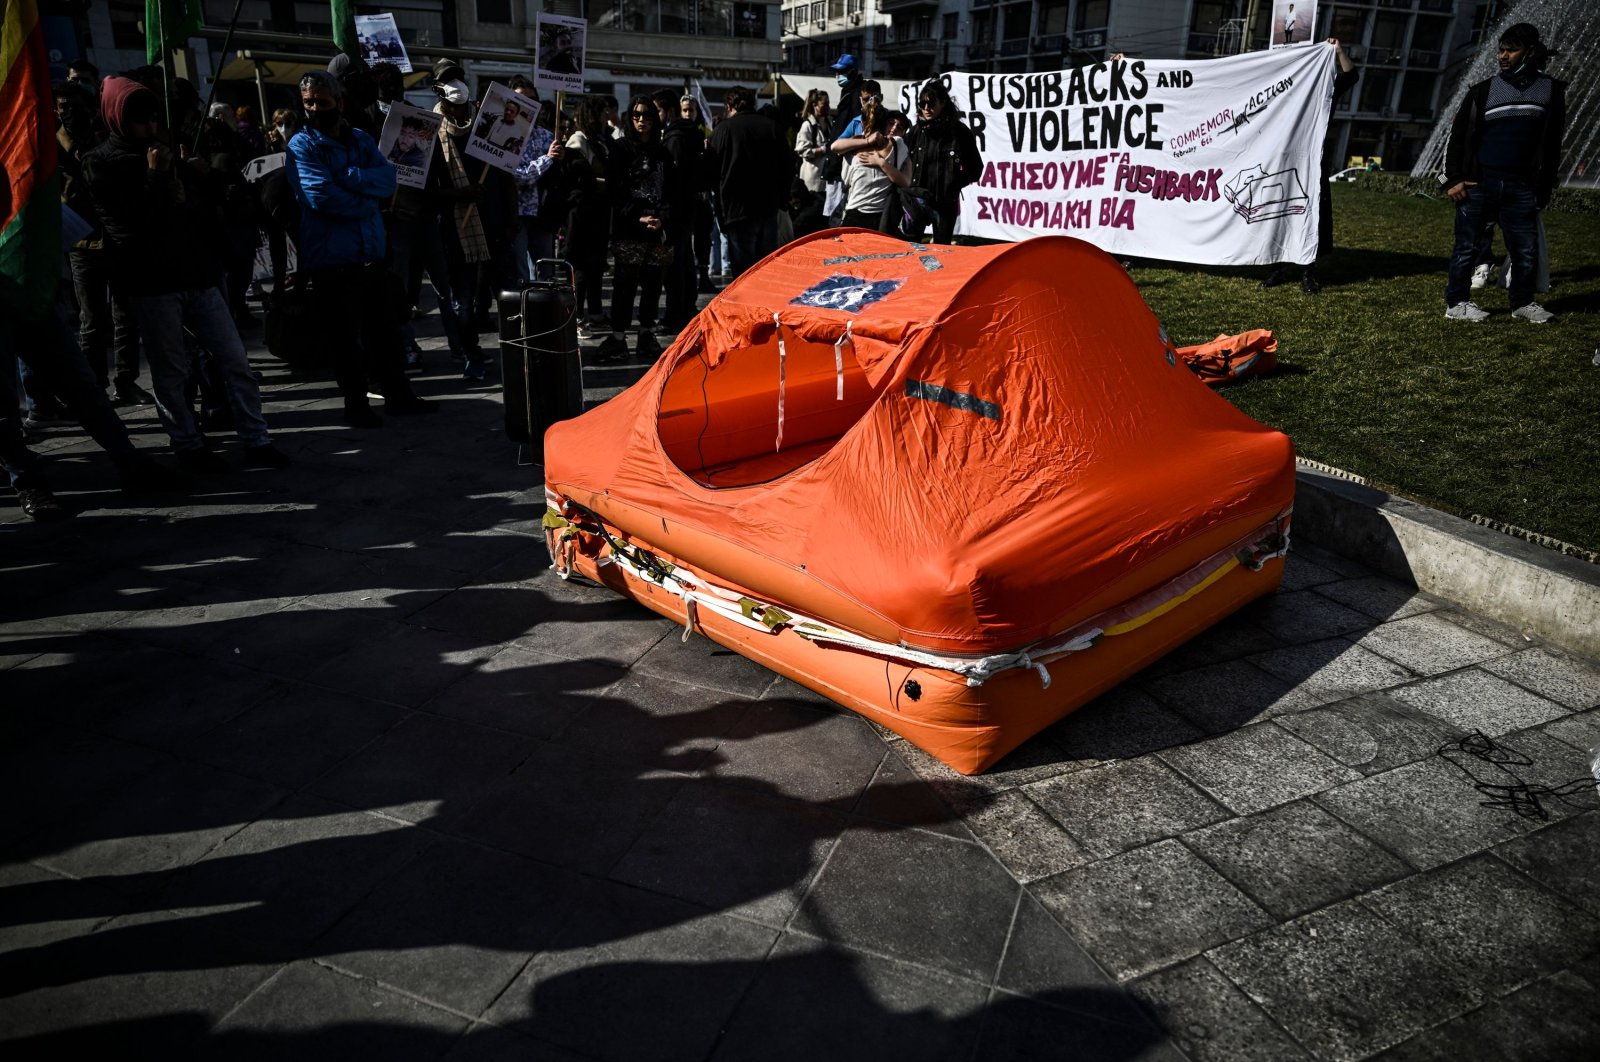 Protesters stand around a life raft during a demonstration against migrant pushbacks and border violence in central Athens, Greece, Feb. 6, 2022. (AFP Photo)